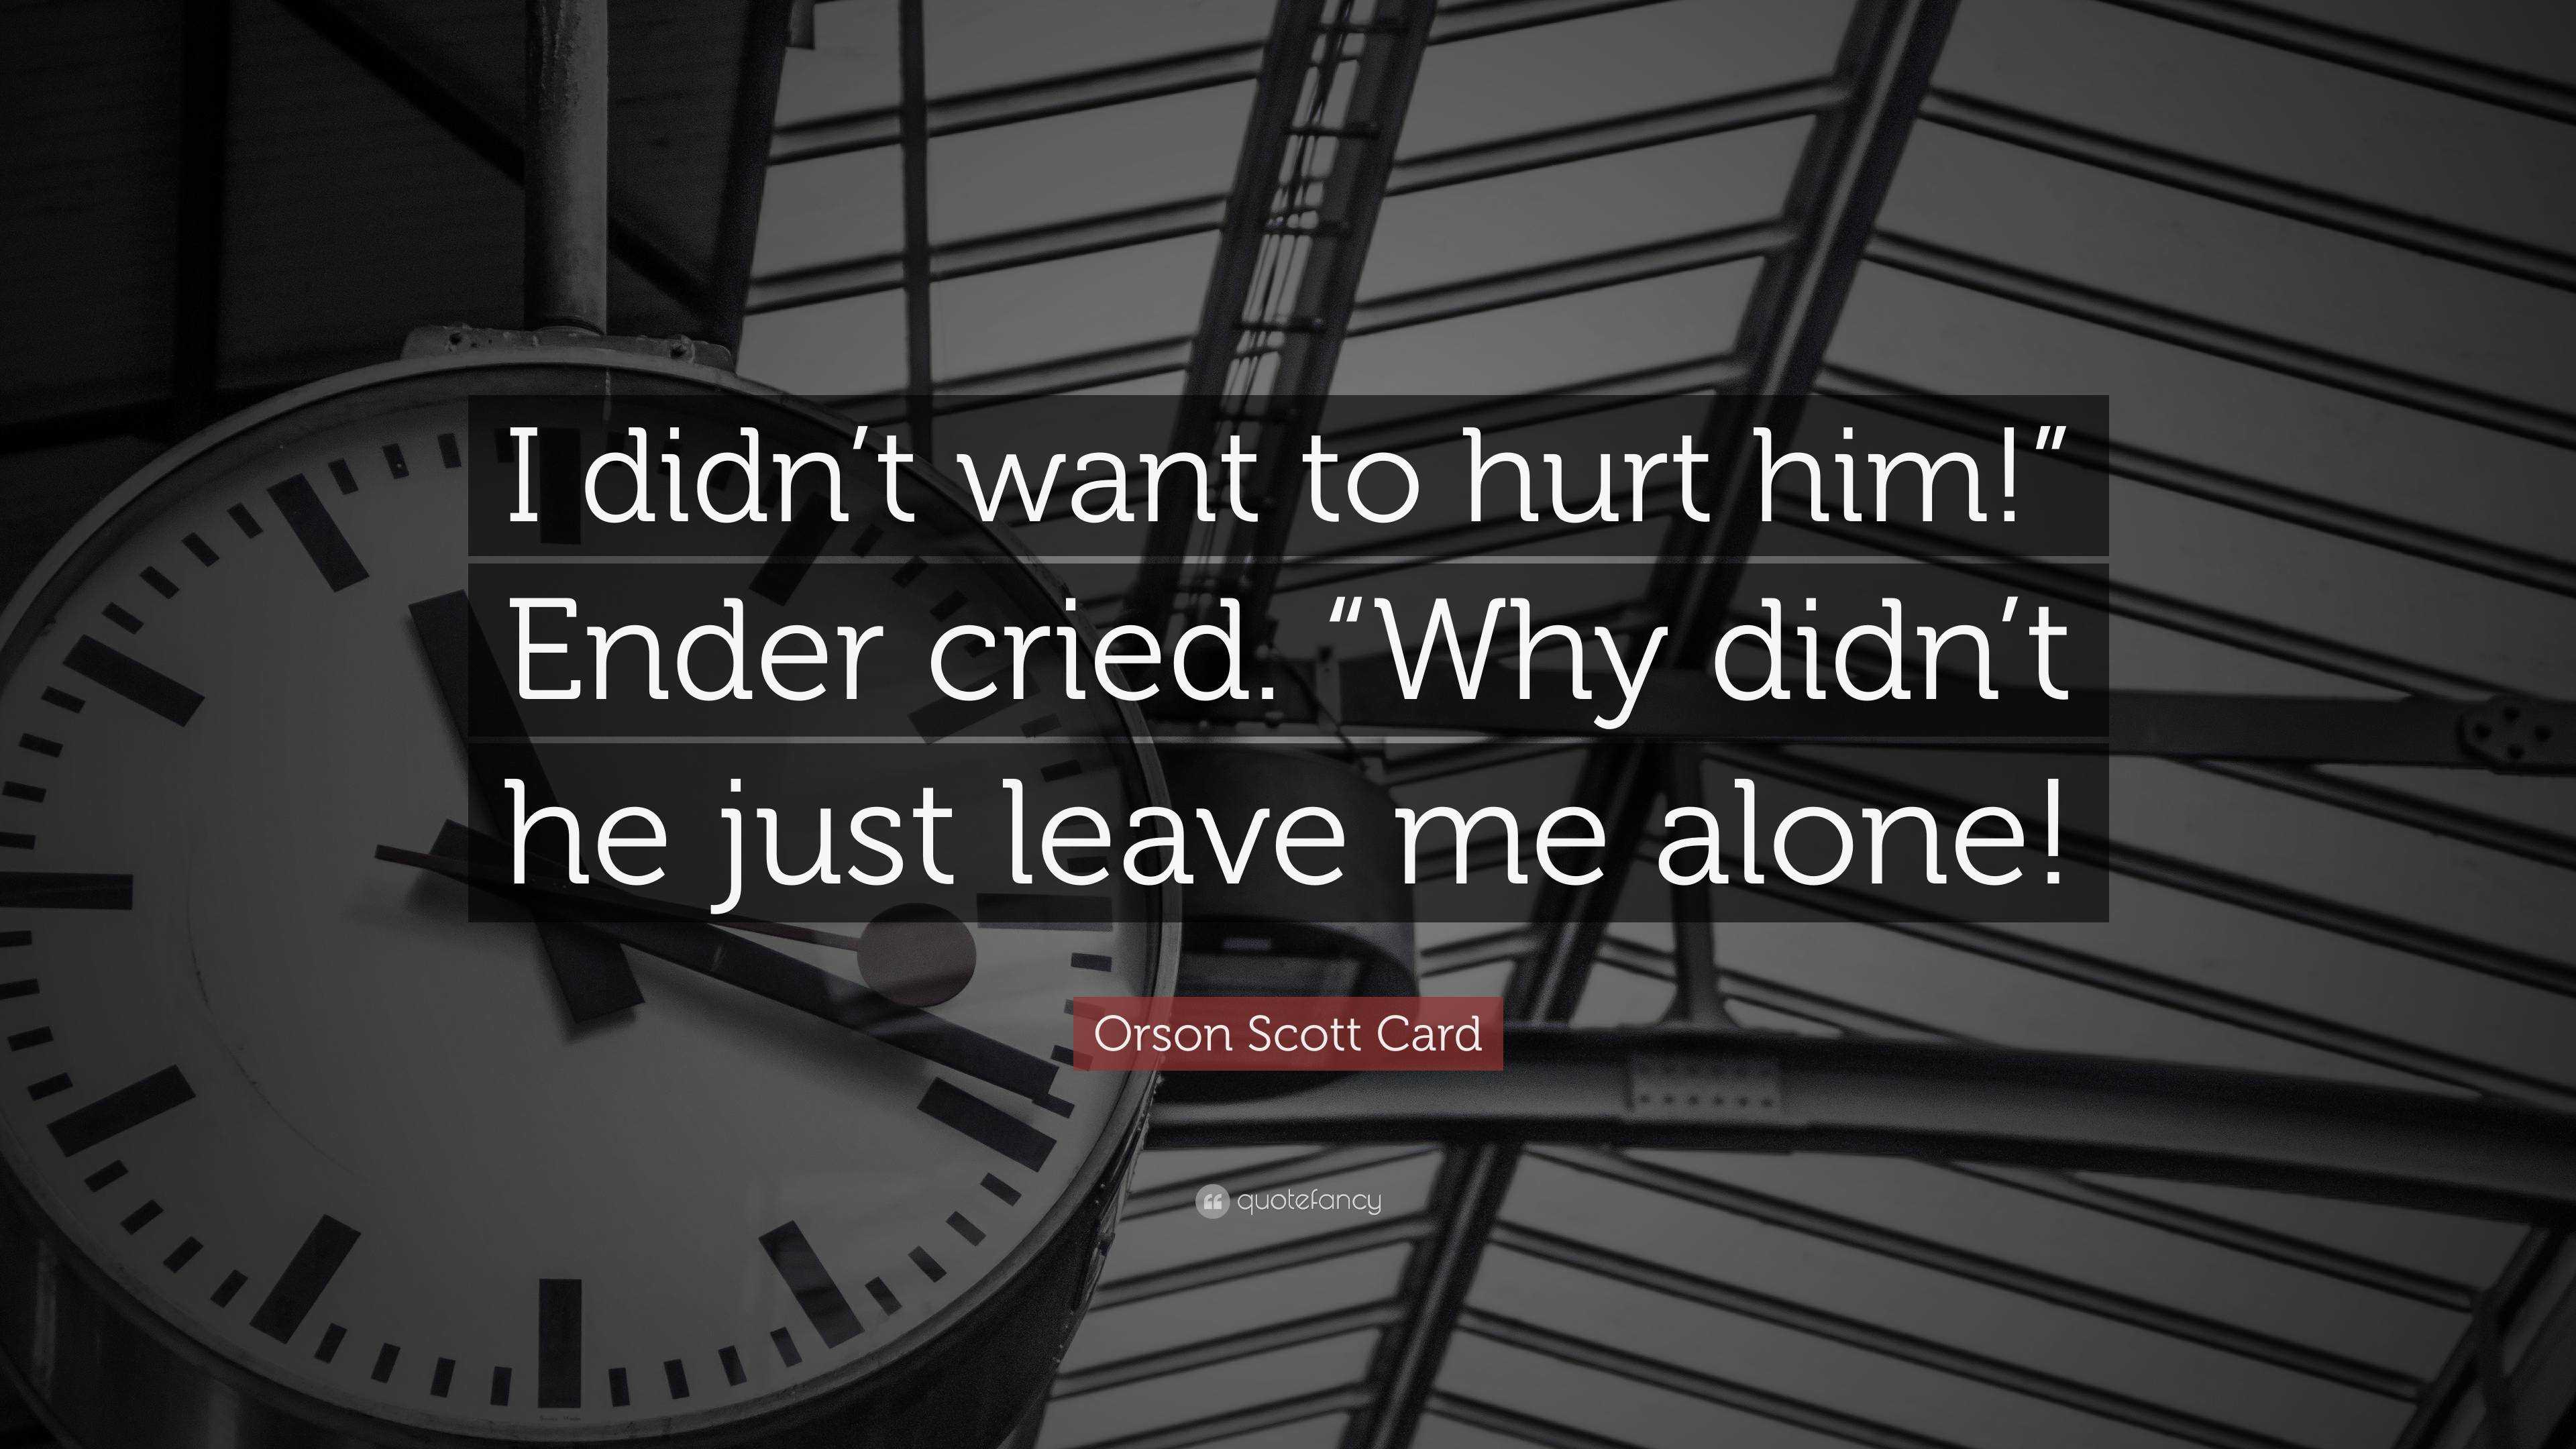 Orson Scott Card Quote: “I didn't want to hurt him!” Ender cried. “Why  didn't